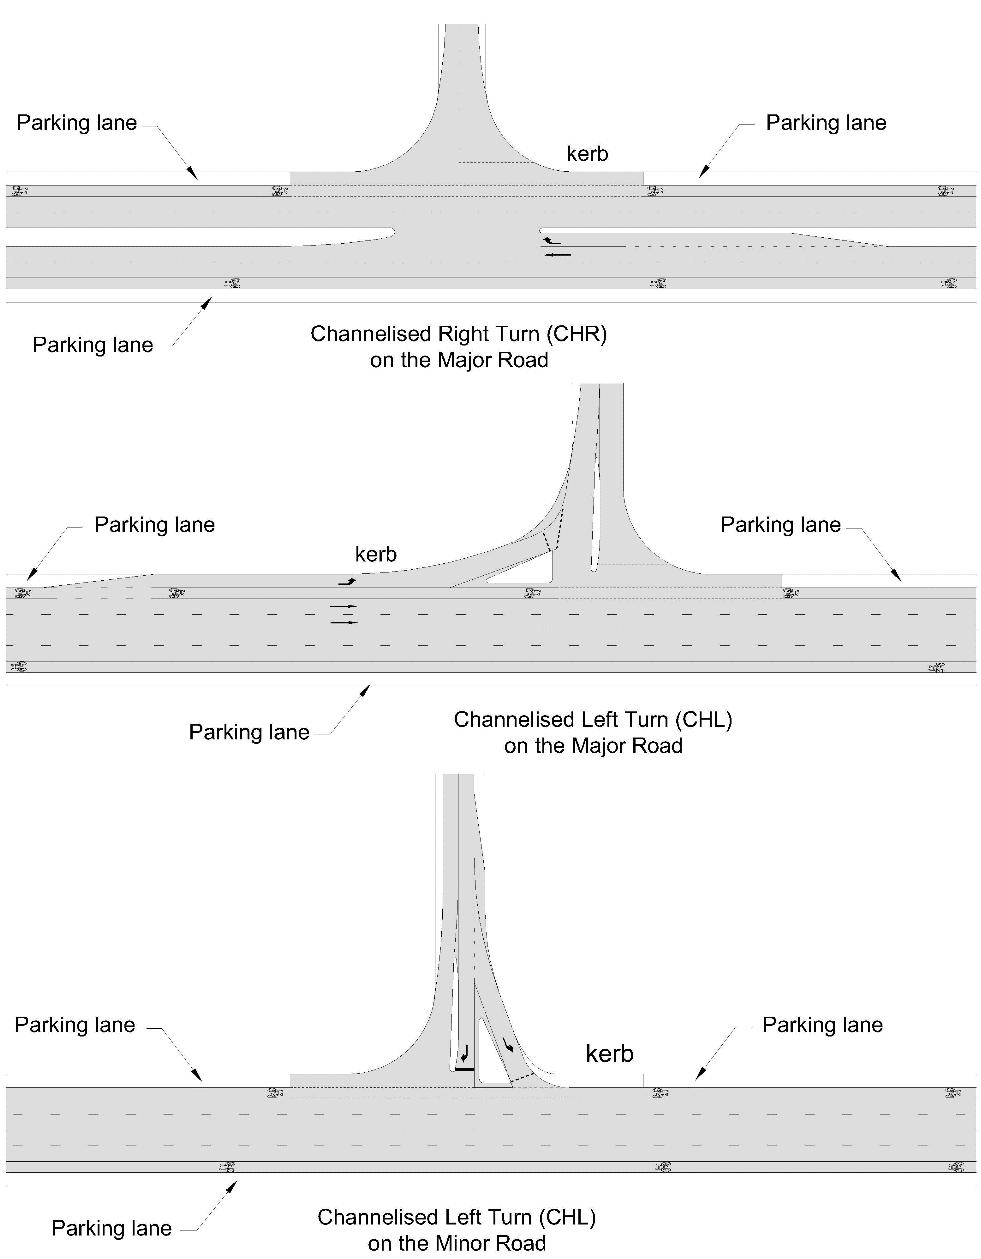 Urban channelised (CH) turn treatments Figure 2.8 shows channelised (CH) turn treatments for urban situations which may or may not be signalised.